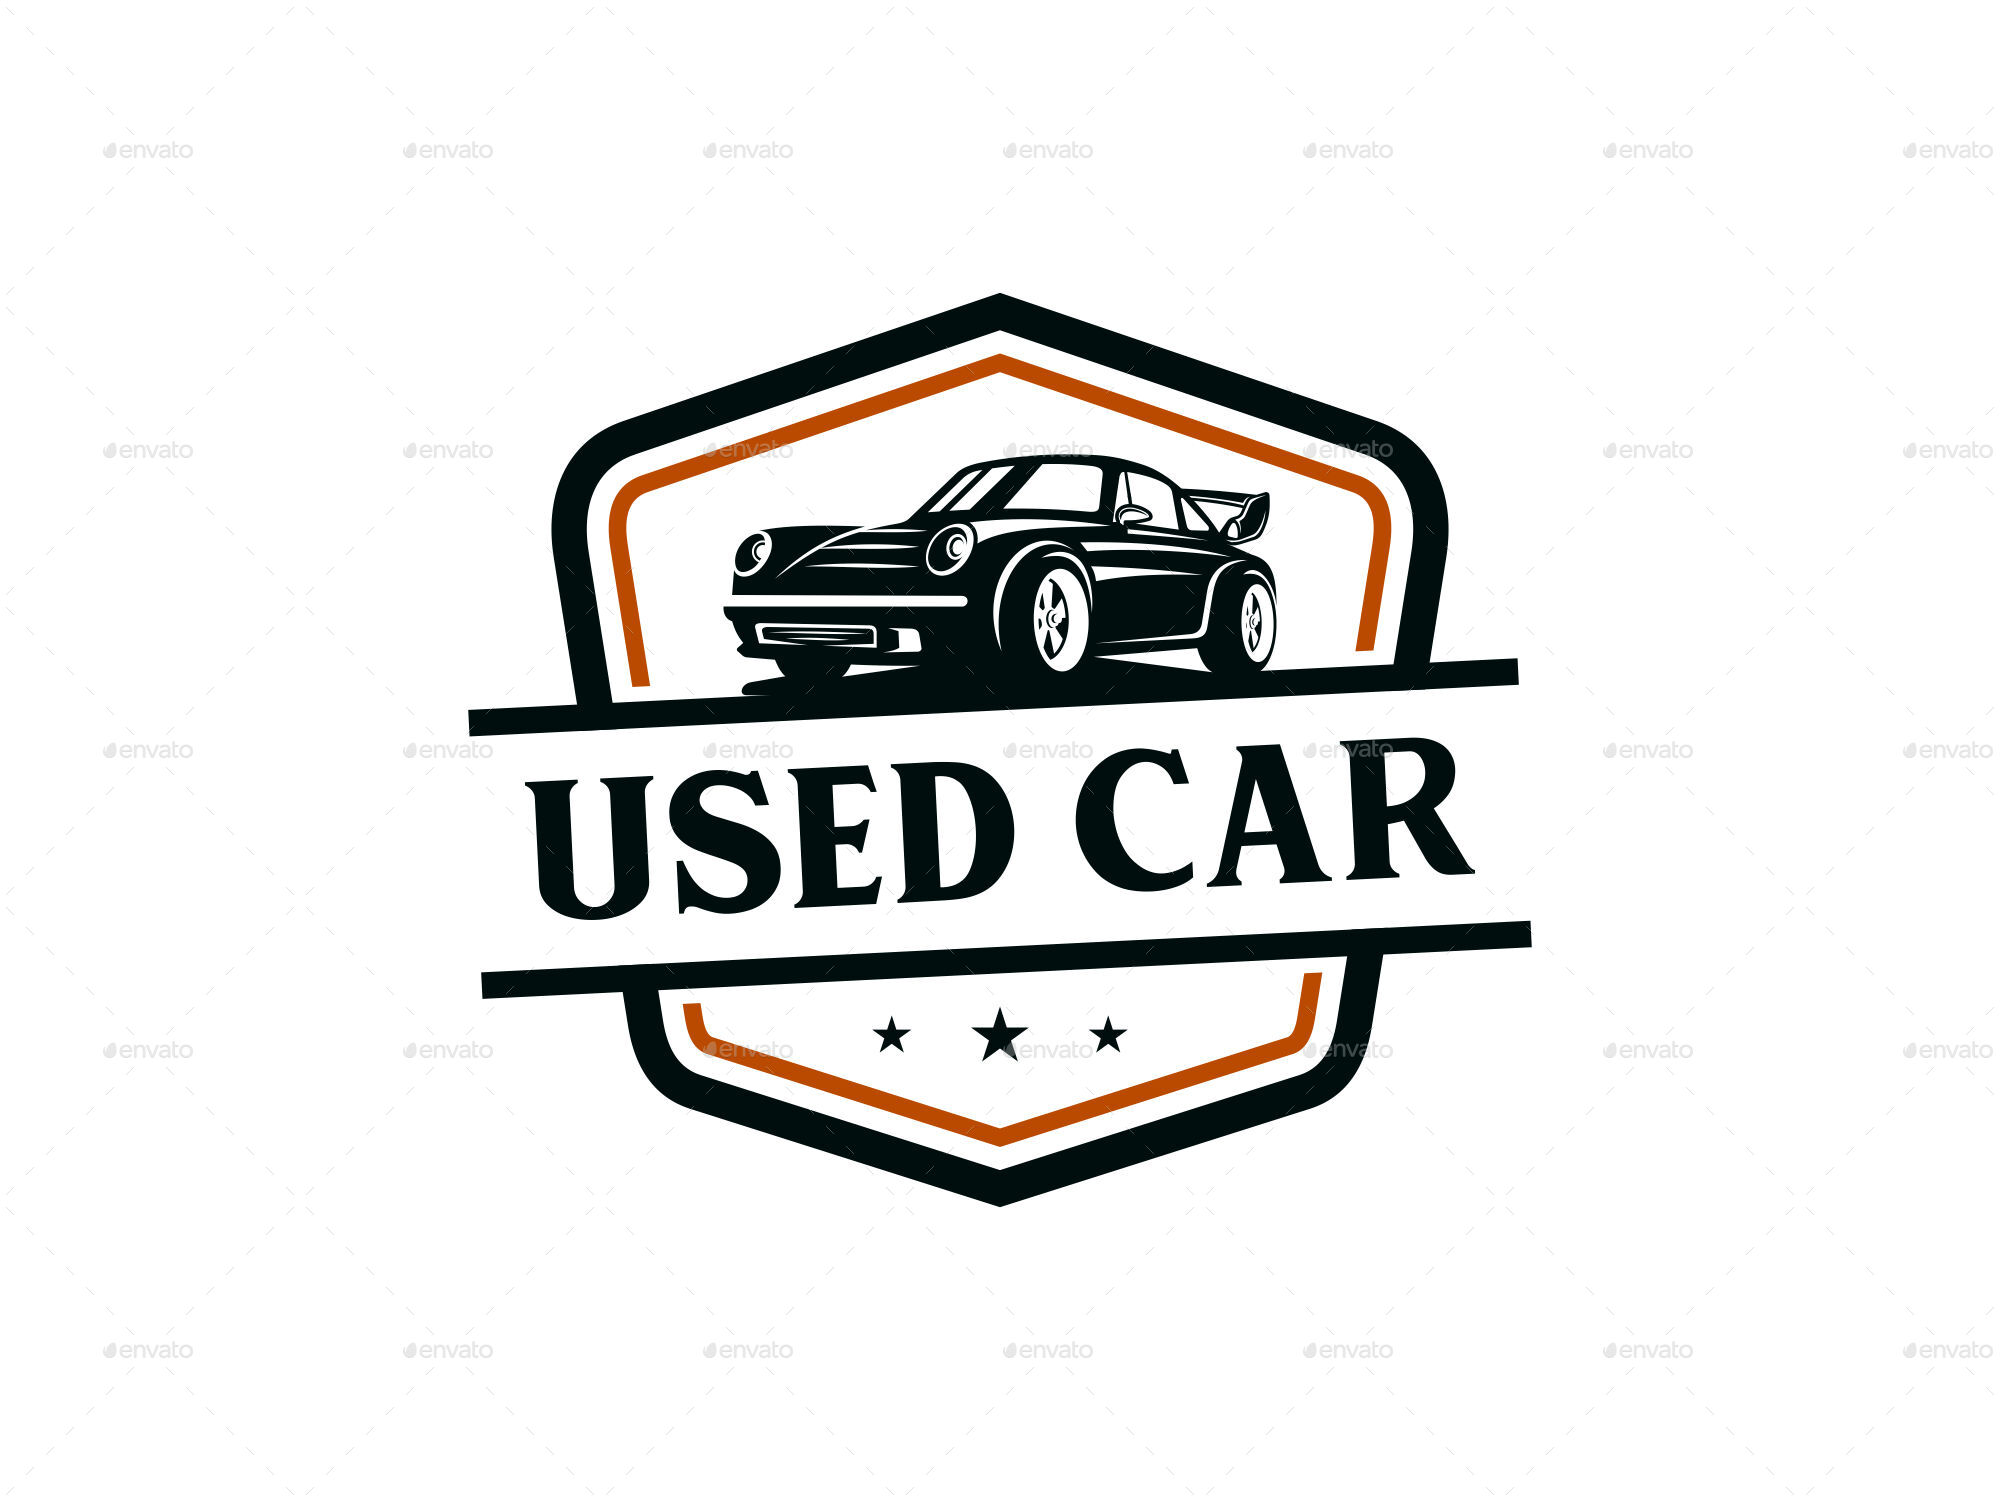 Used Car logo by anto_82 | GraphicRiver